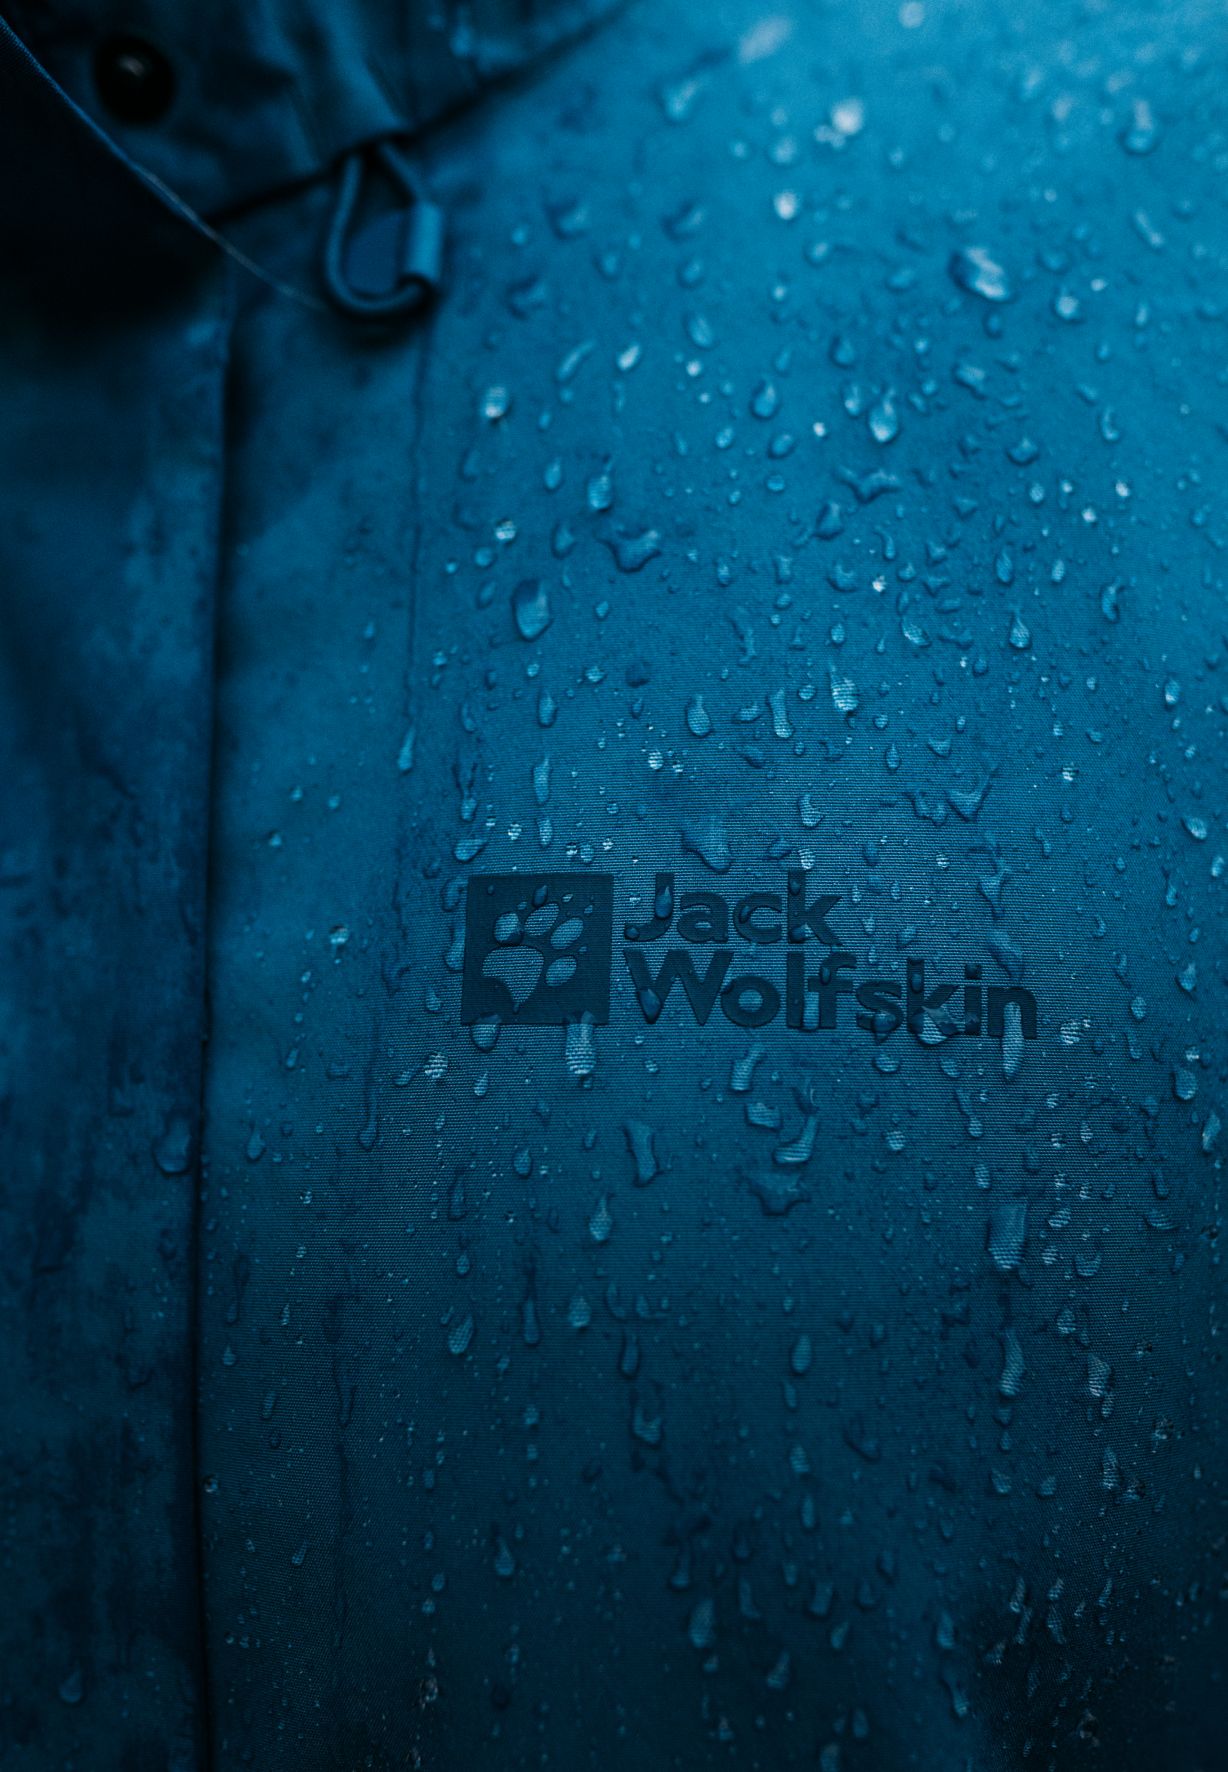 Our norm for waterproof performance